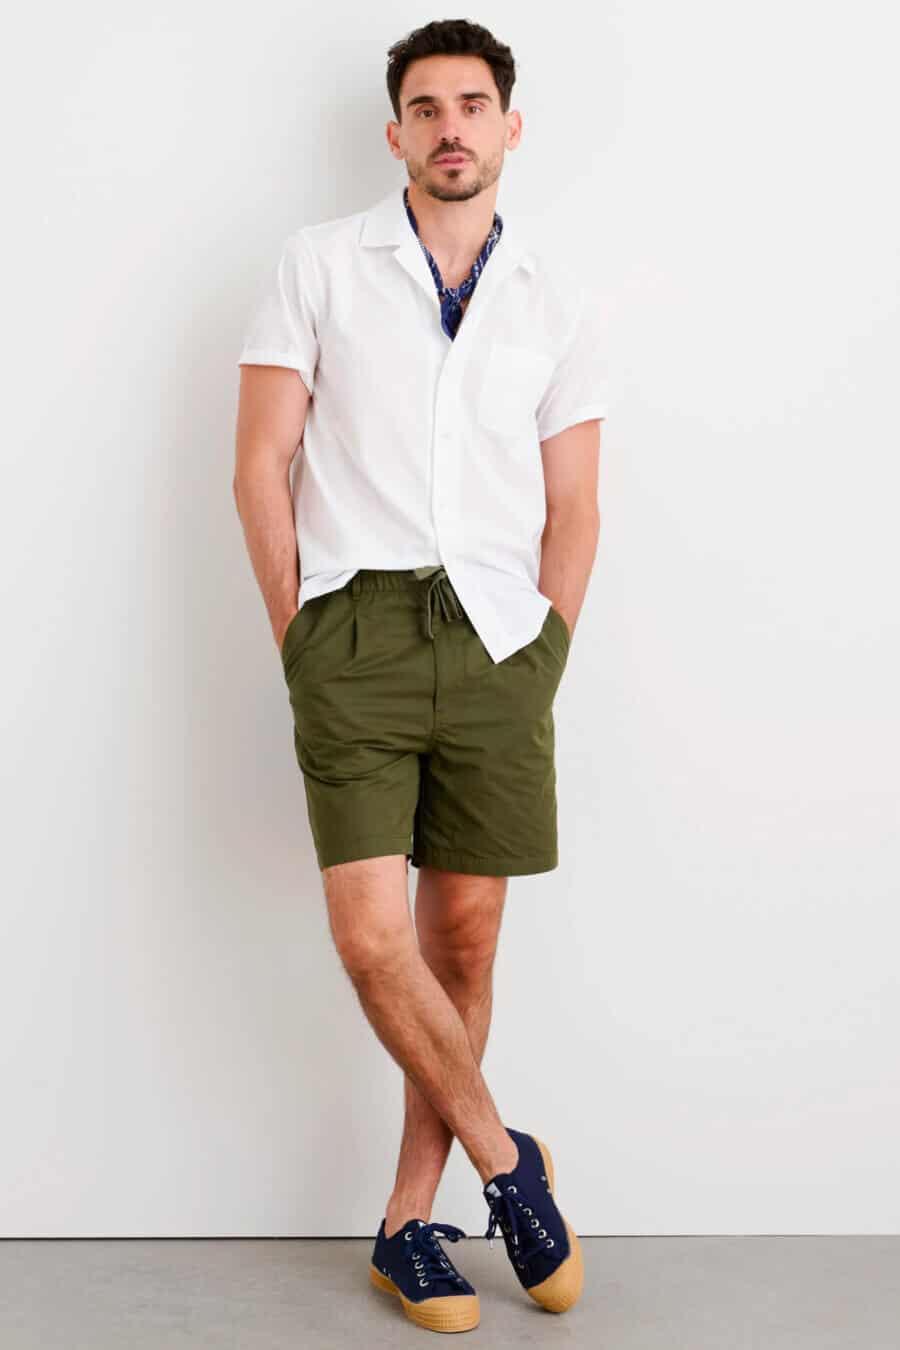 Men's green drawstring shorts, white short sleeve shirt and sneakers outfit